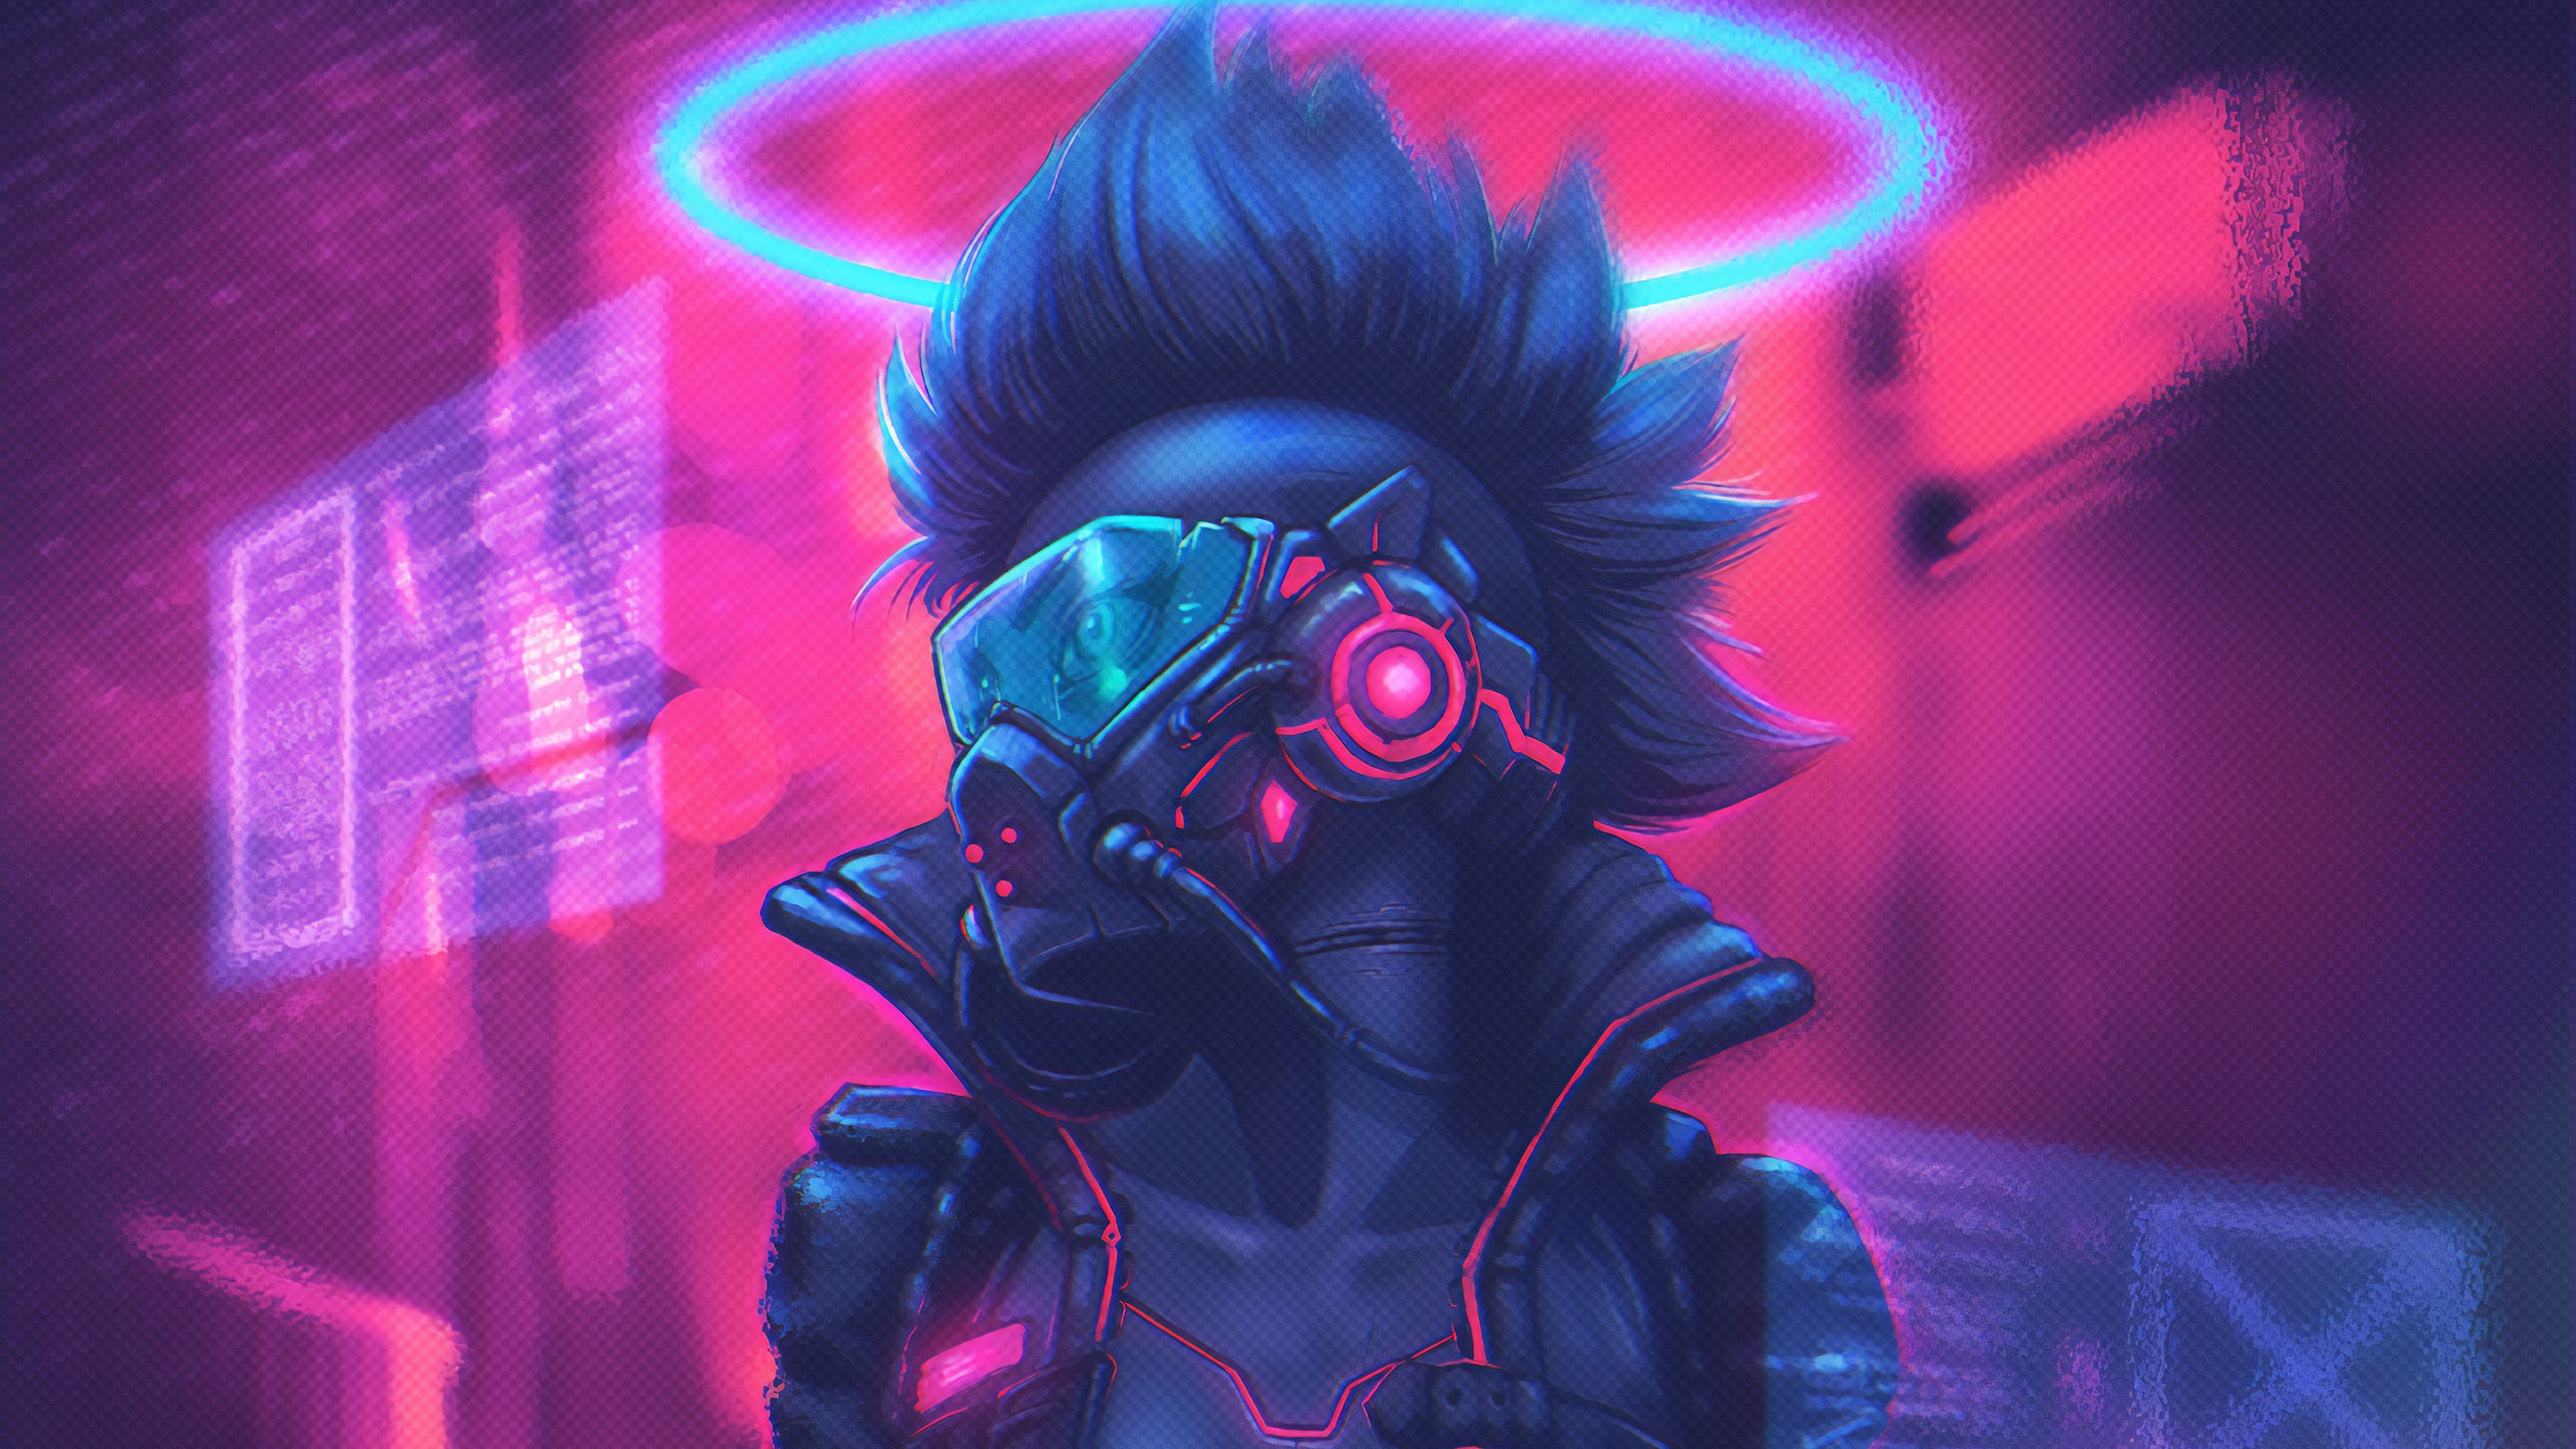 Cyberpunk Colorful Art, HD Artist, 4k Wallpapers, Images, Backgrounds